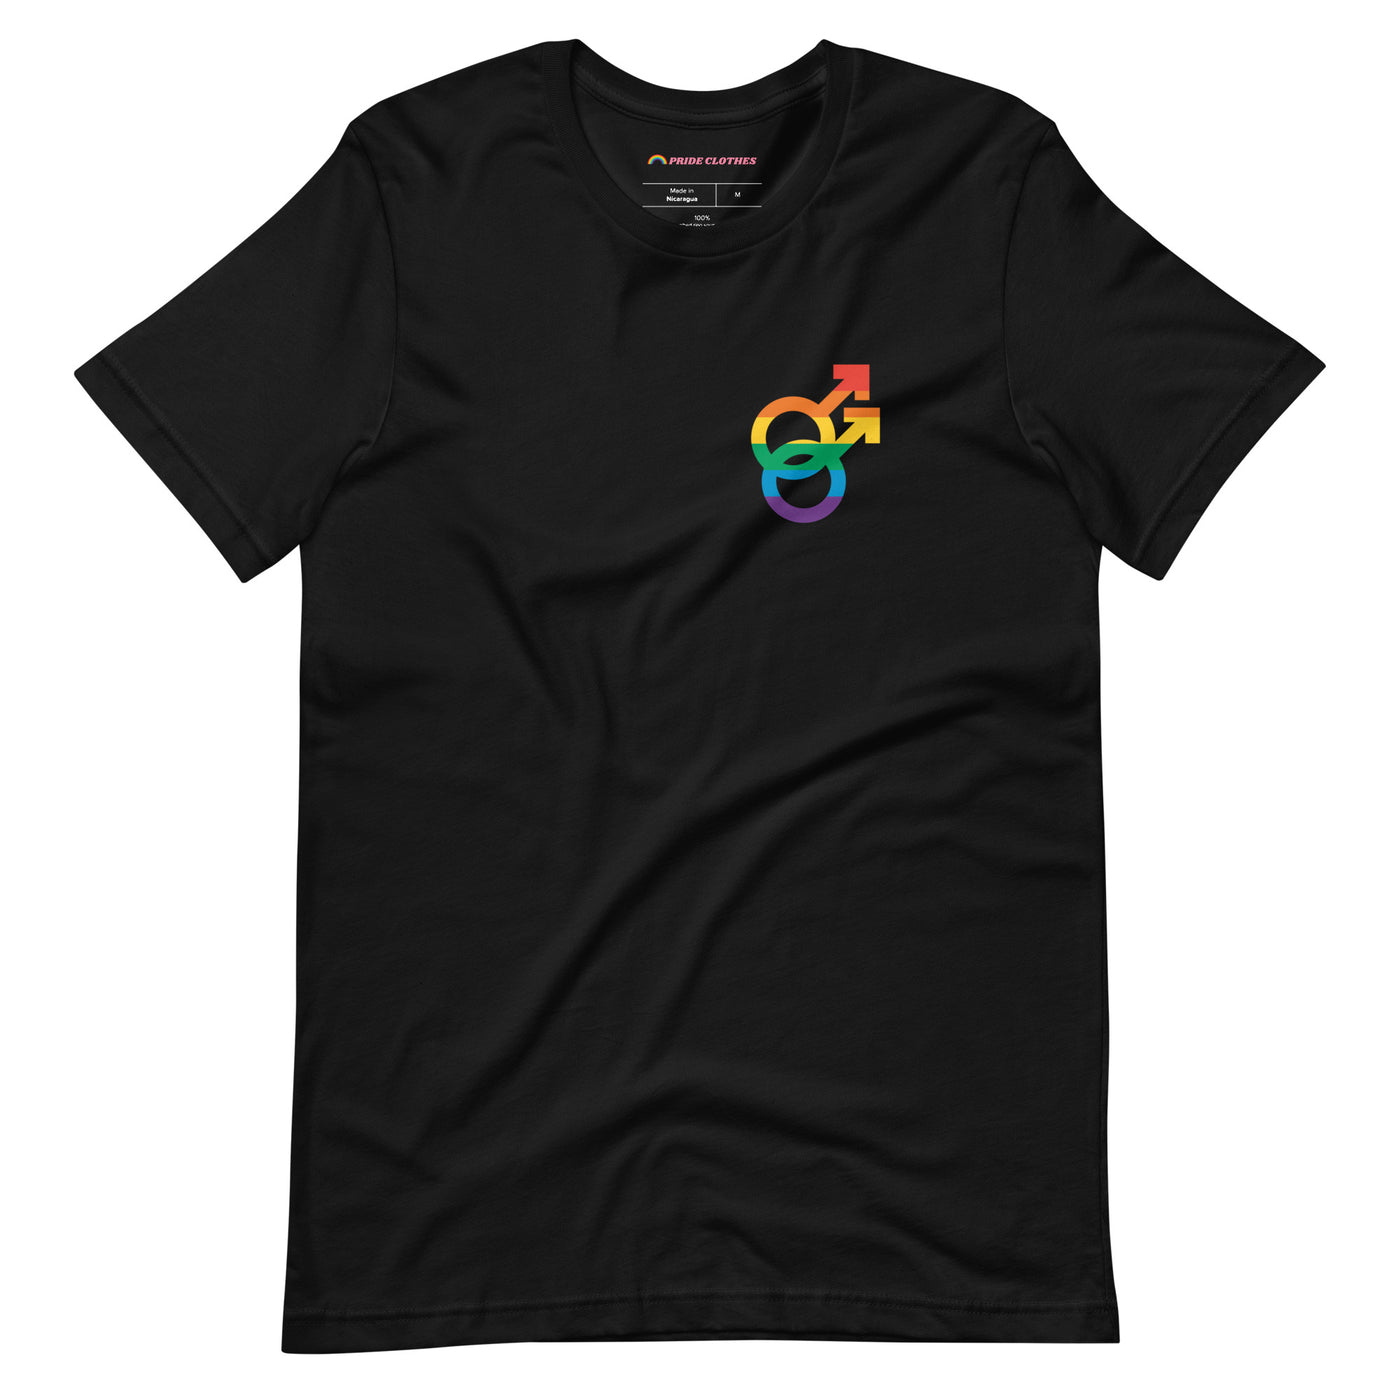 Pride Clothes - Fearlessly Express Your Truth Gay Gender Pride T-Shirt - Black